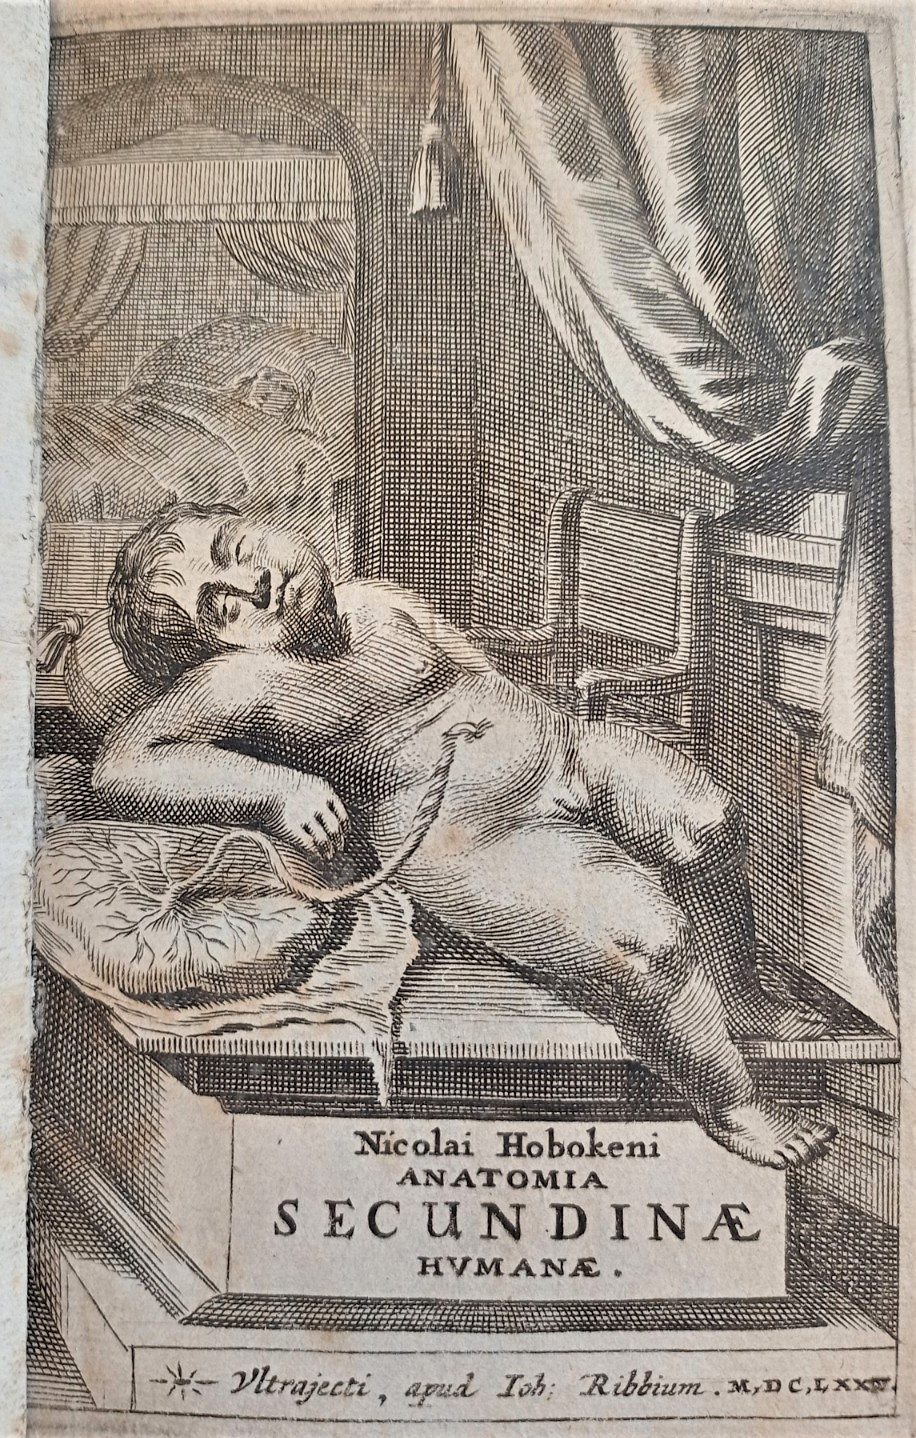 Illustrated title page shows a baby lying on a table, with umbilical chord and placenta still attached. In the background, the mother can be seen asleep in a four poster bed.